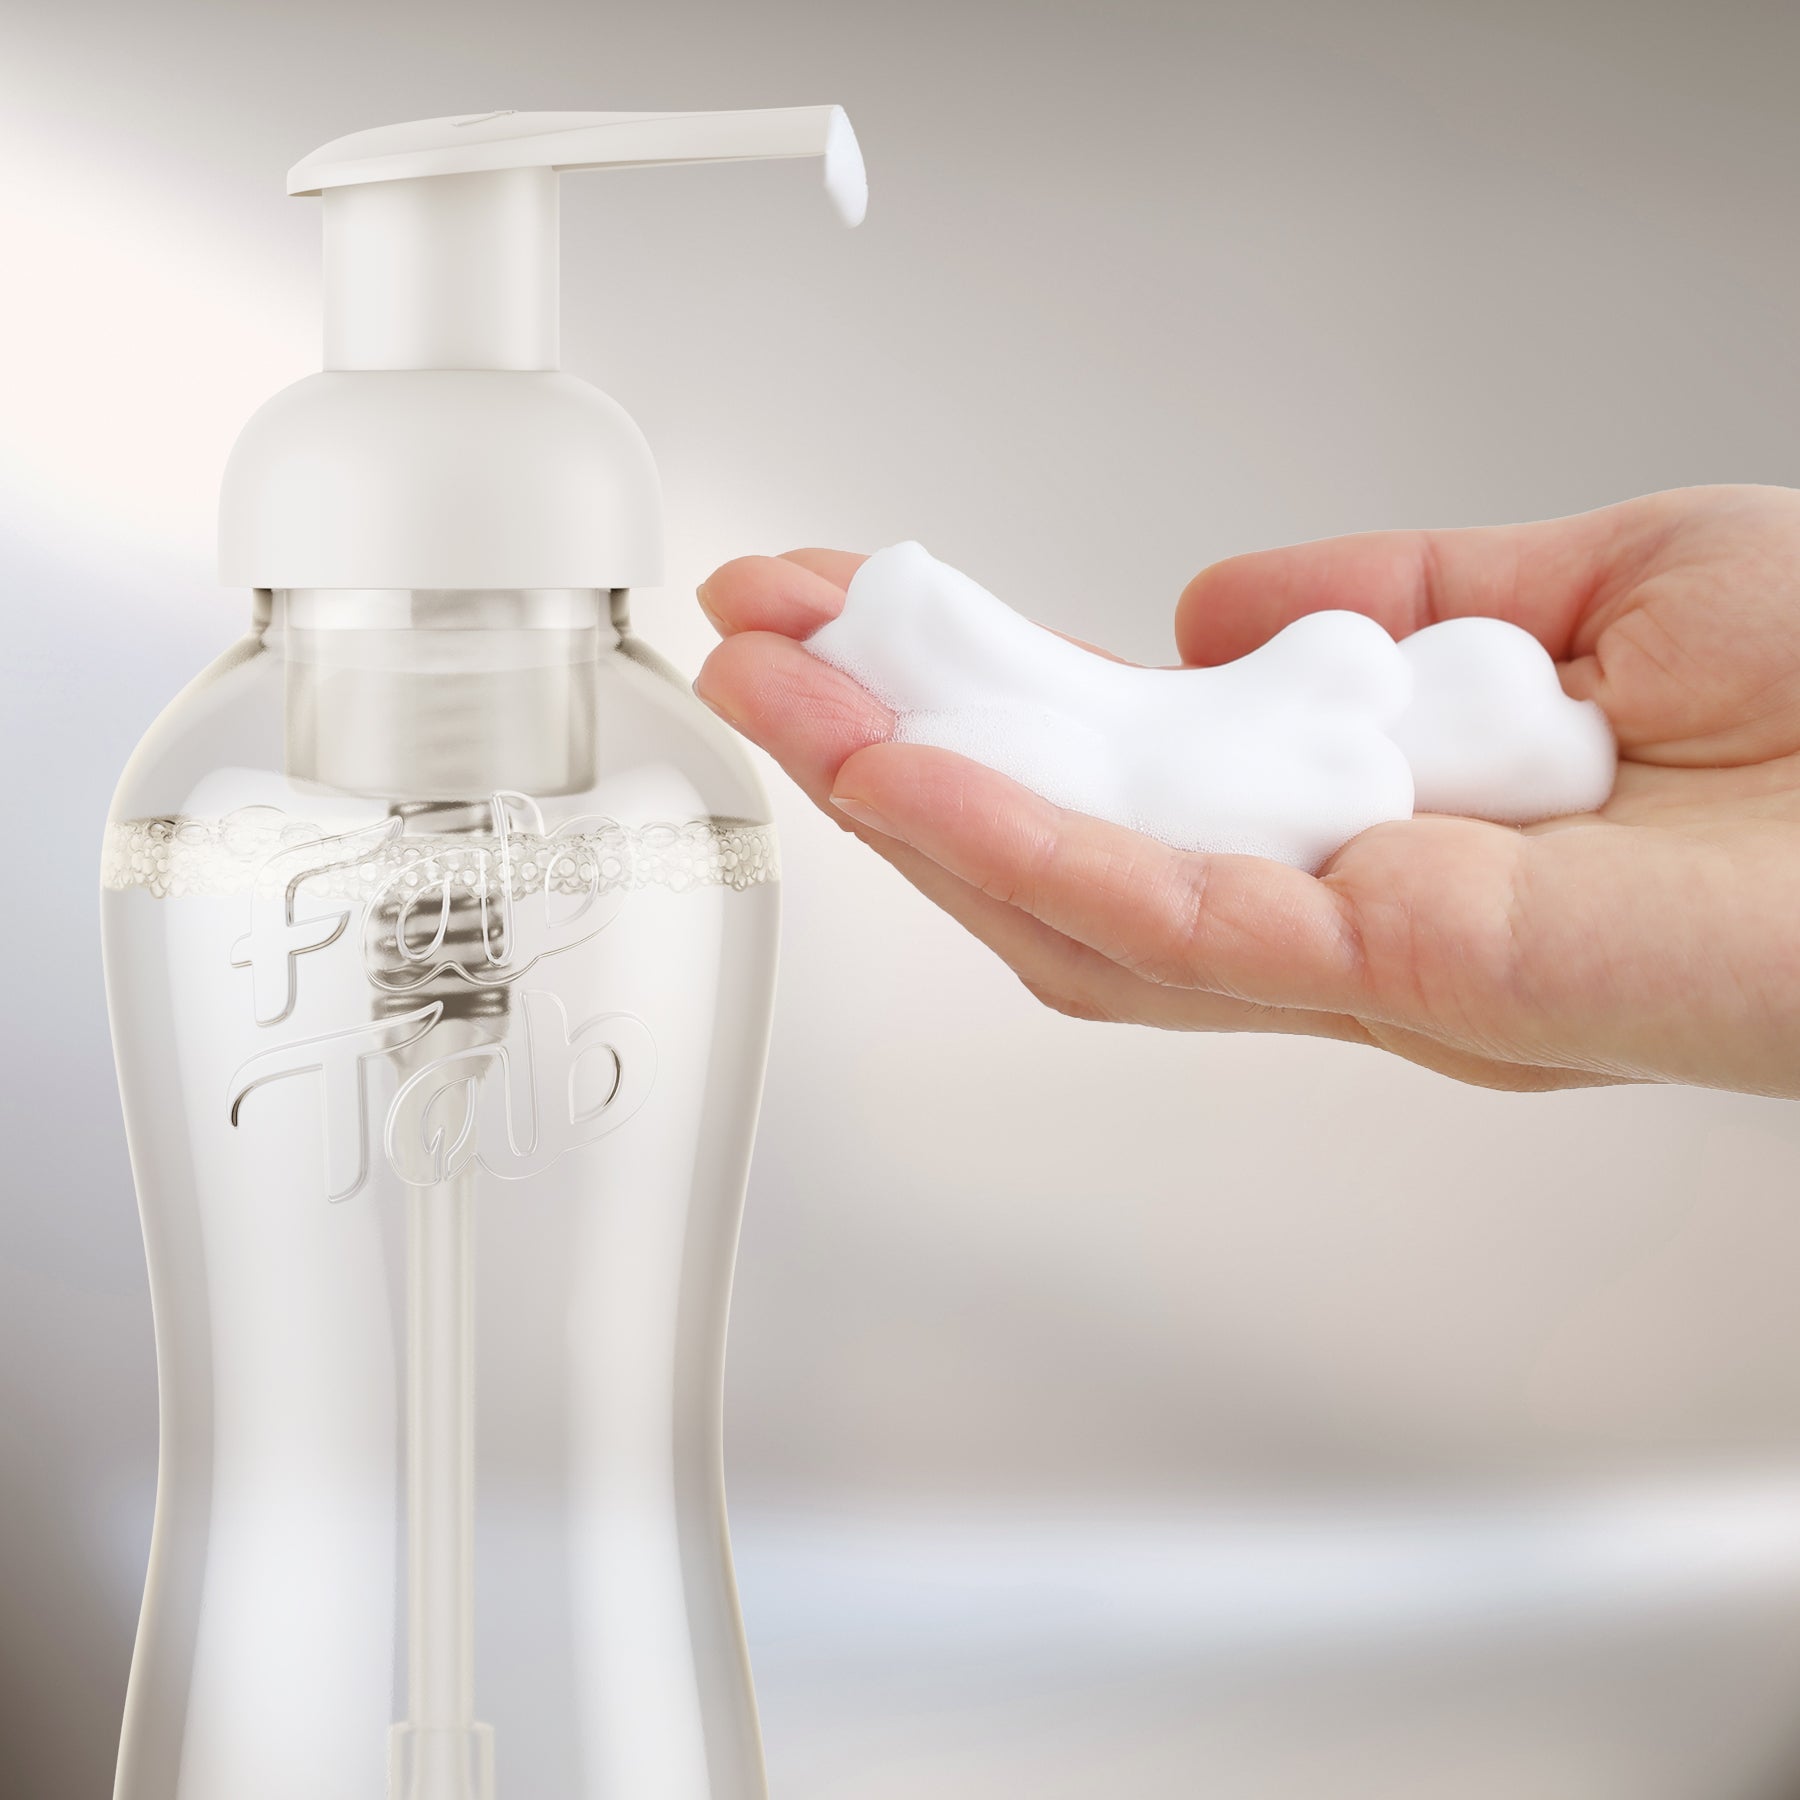 Load video: &lt;p&gt;Drop one of our spectacular foaming hand soap tablets into your glass bottle already filled with warm water, watch it dissolve entirely, and voilà – your hands are in for a dance party that&#39;s more fun than a surprise birthday bash.&lt;/p&gt;